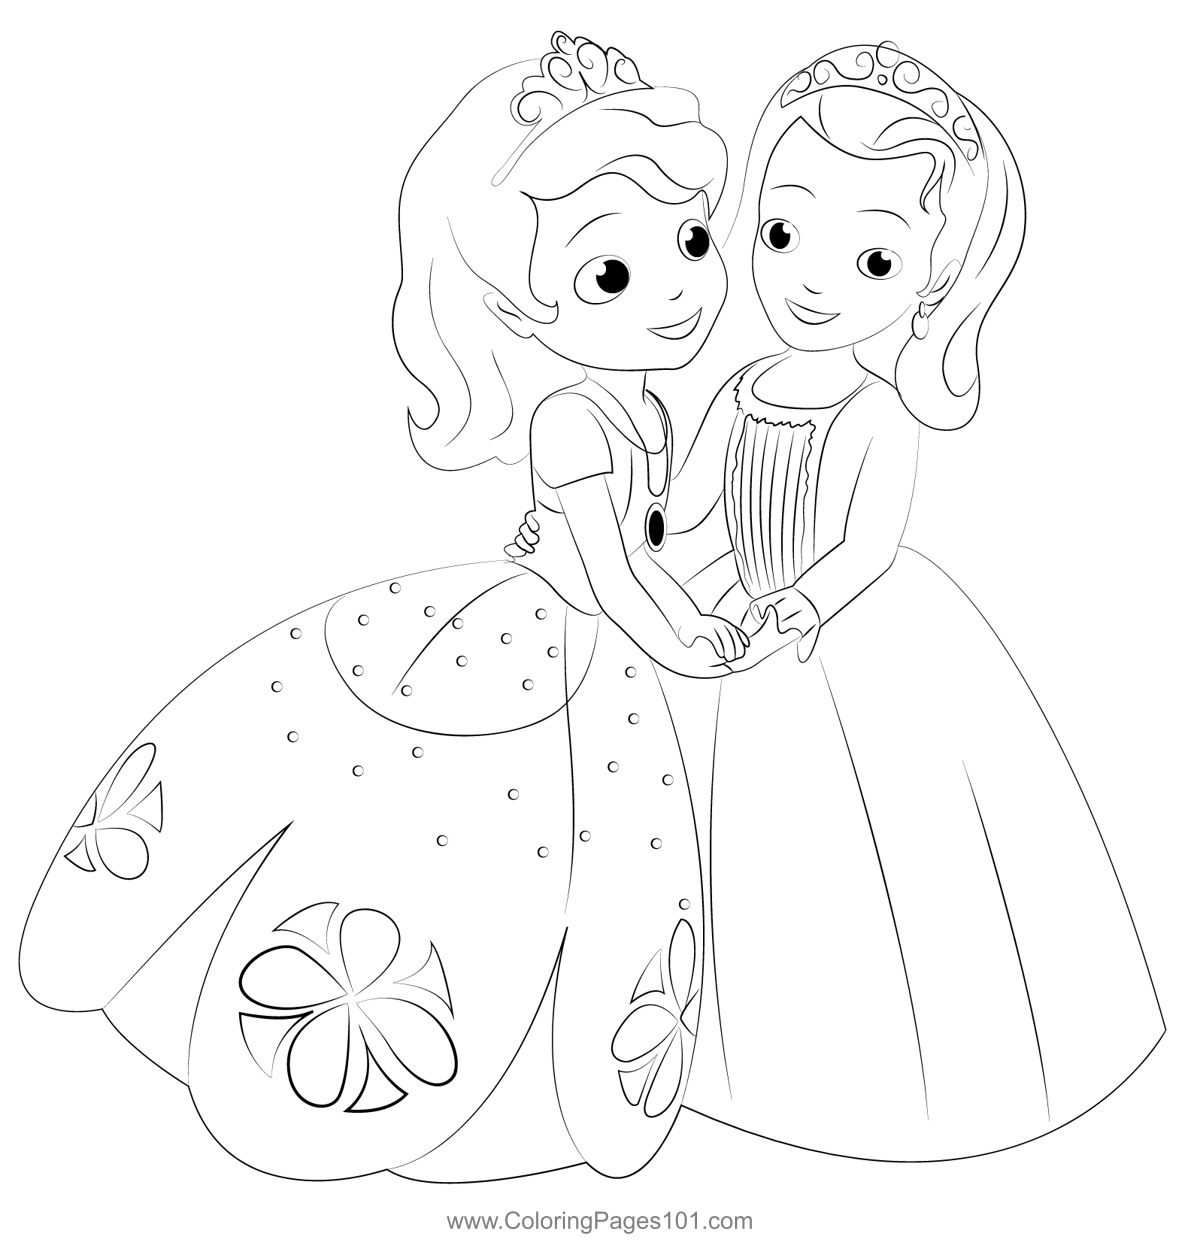 Princess Amber Coloring Page for Kids - Free Sofia the First Printable ...